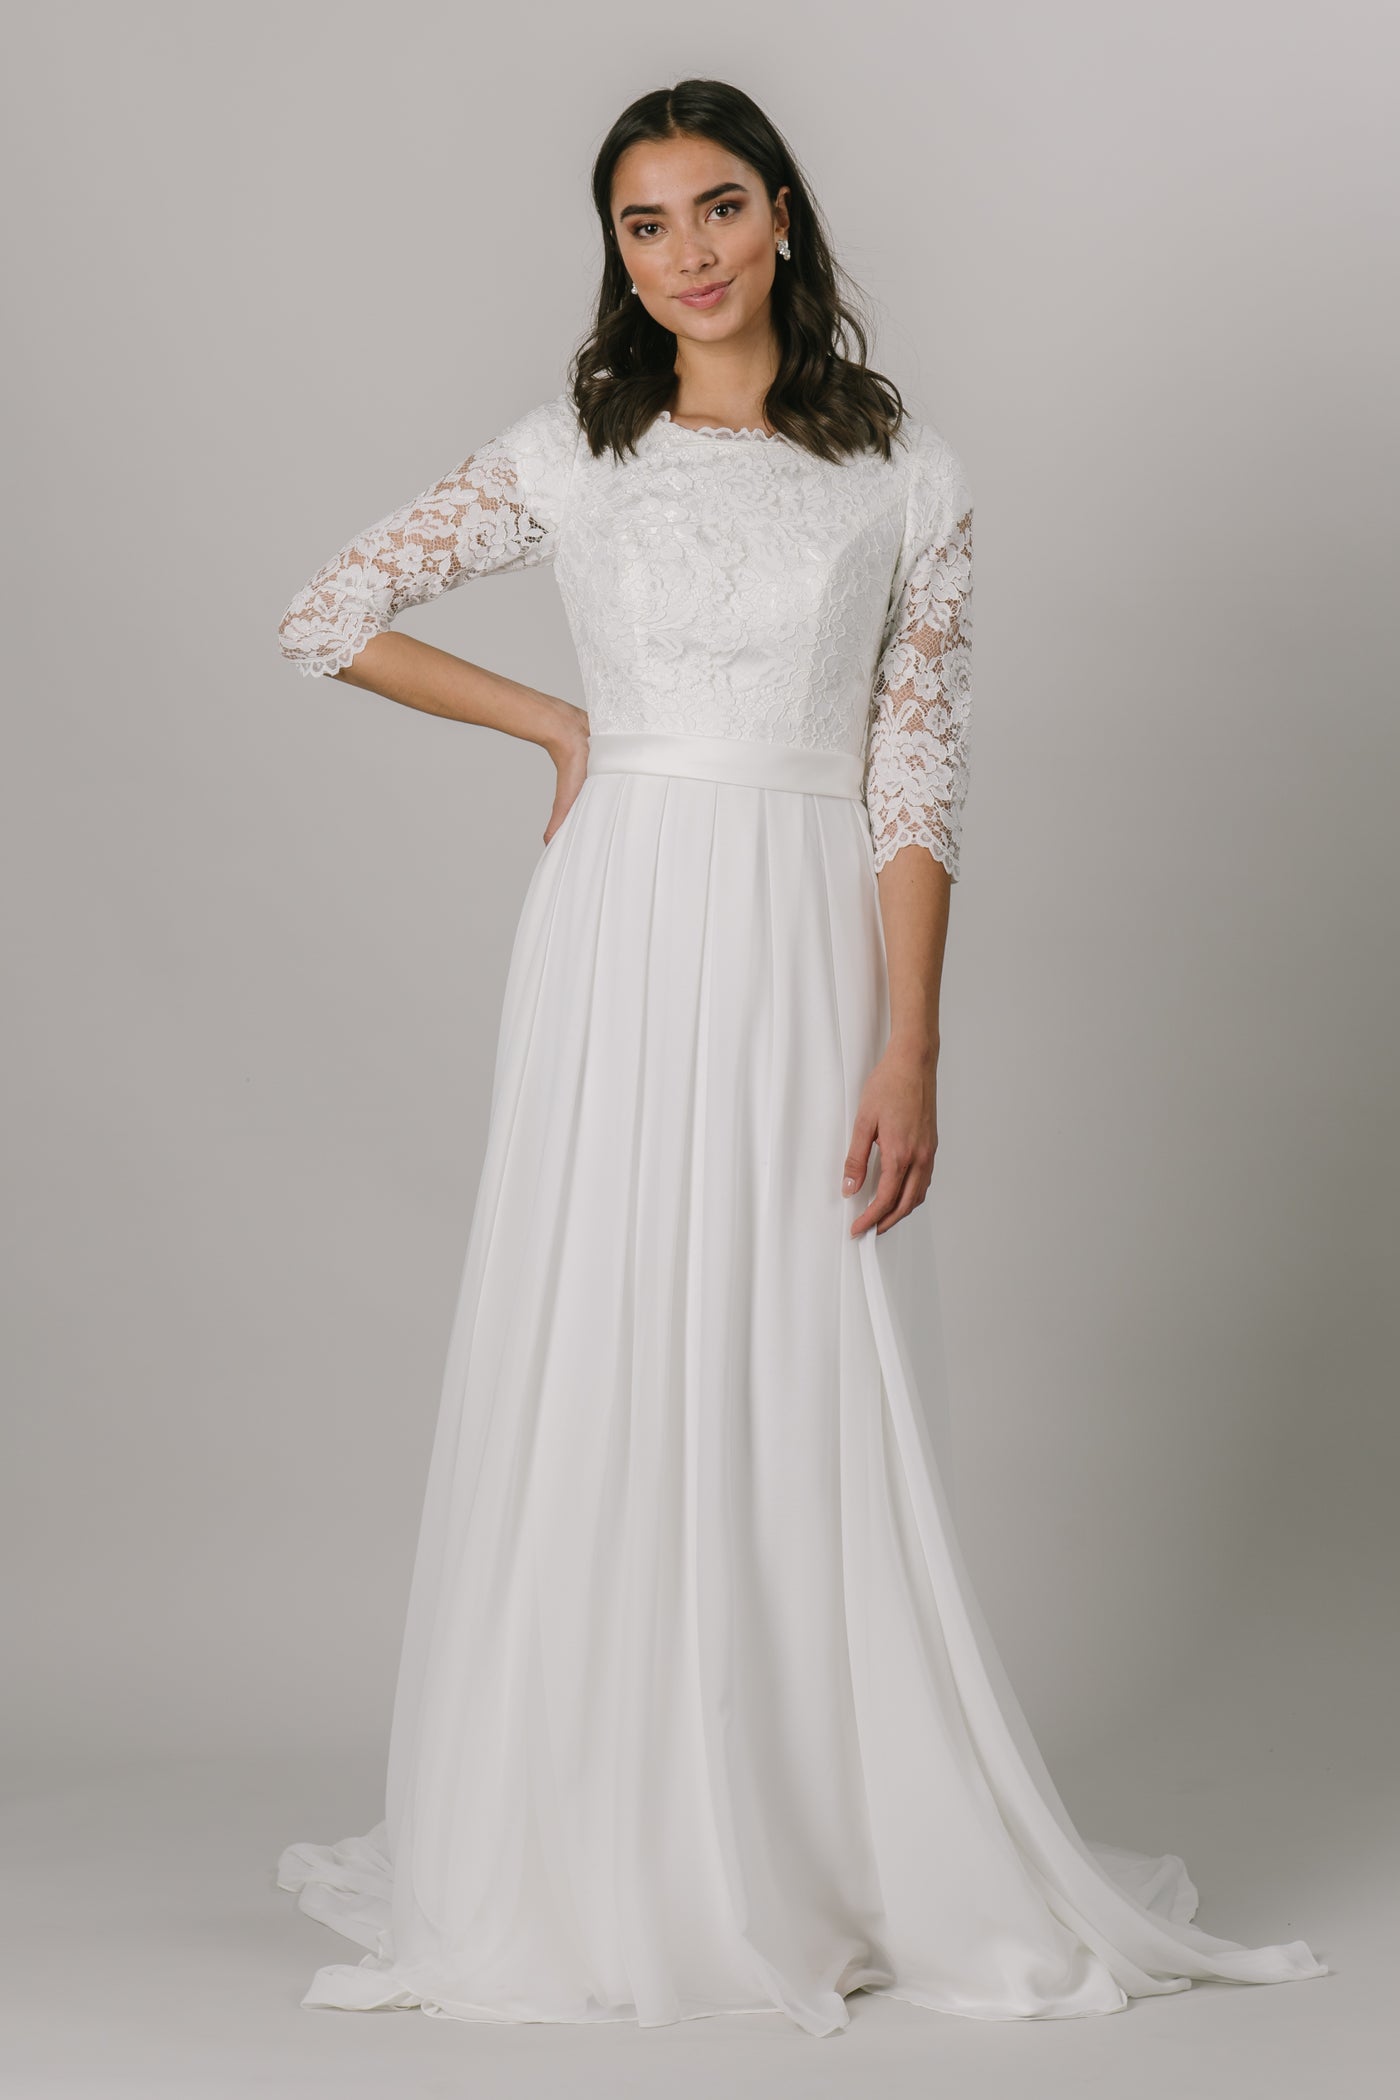 A lace a line white wedding dress that has a belt with a chiffon skirt and buttons that go 3/4 of the dress, from a bridal store located in Salt Lake City, Utah.